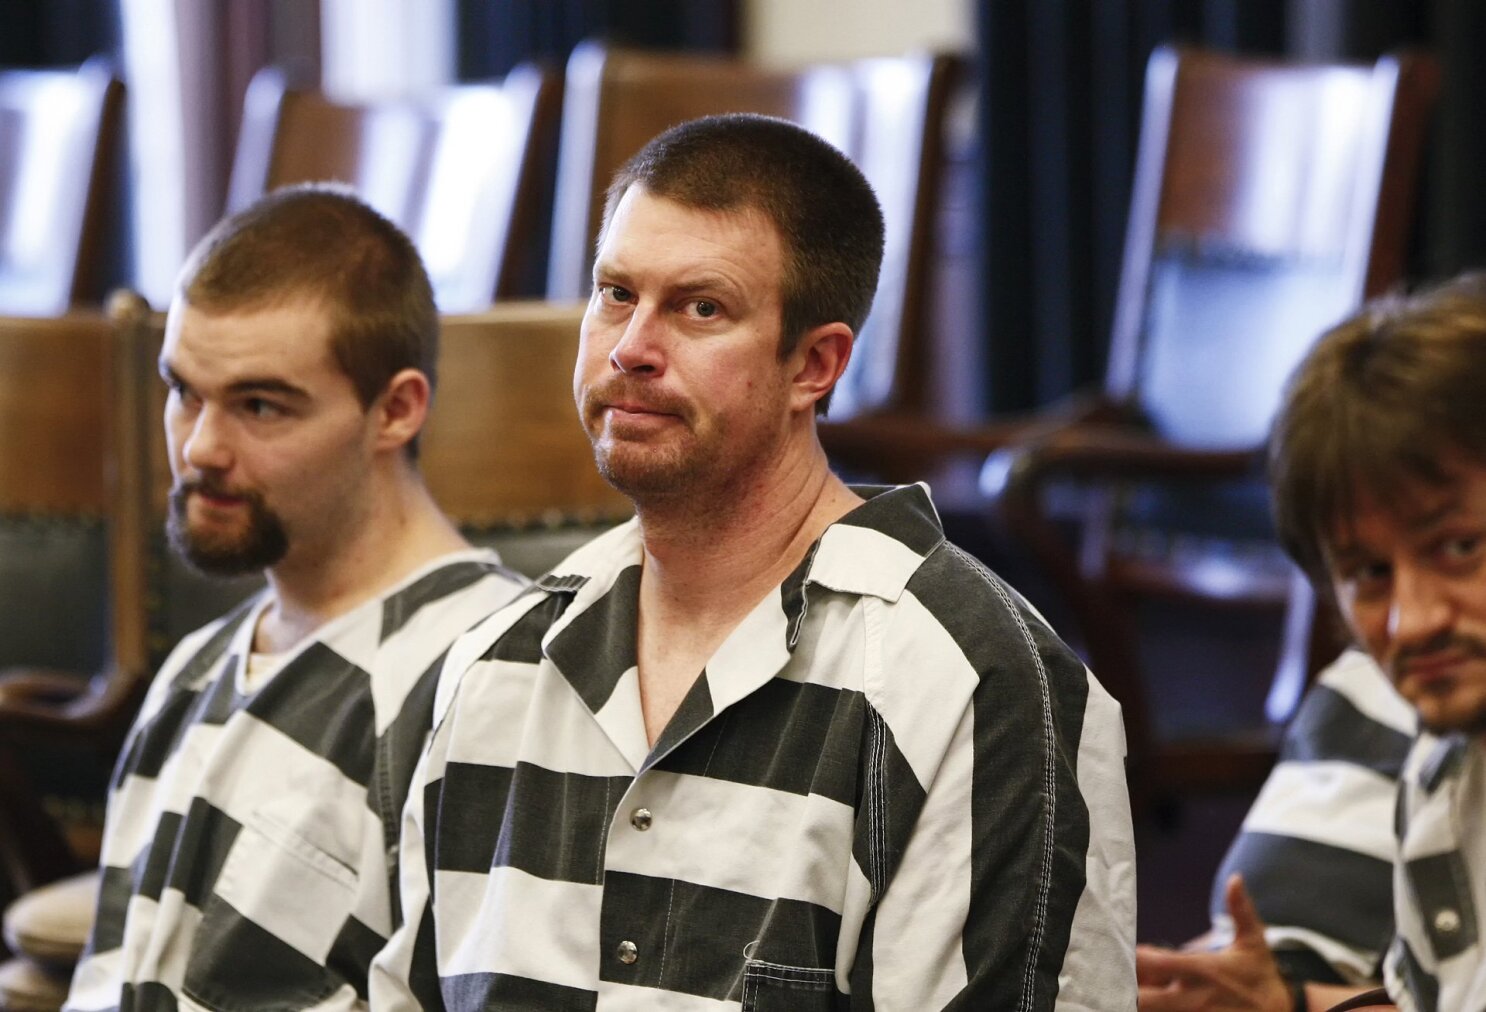 NFL veteran Ryan Leaf shares his drug addiction and recovery story